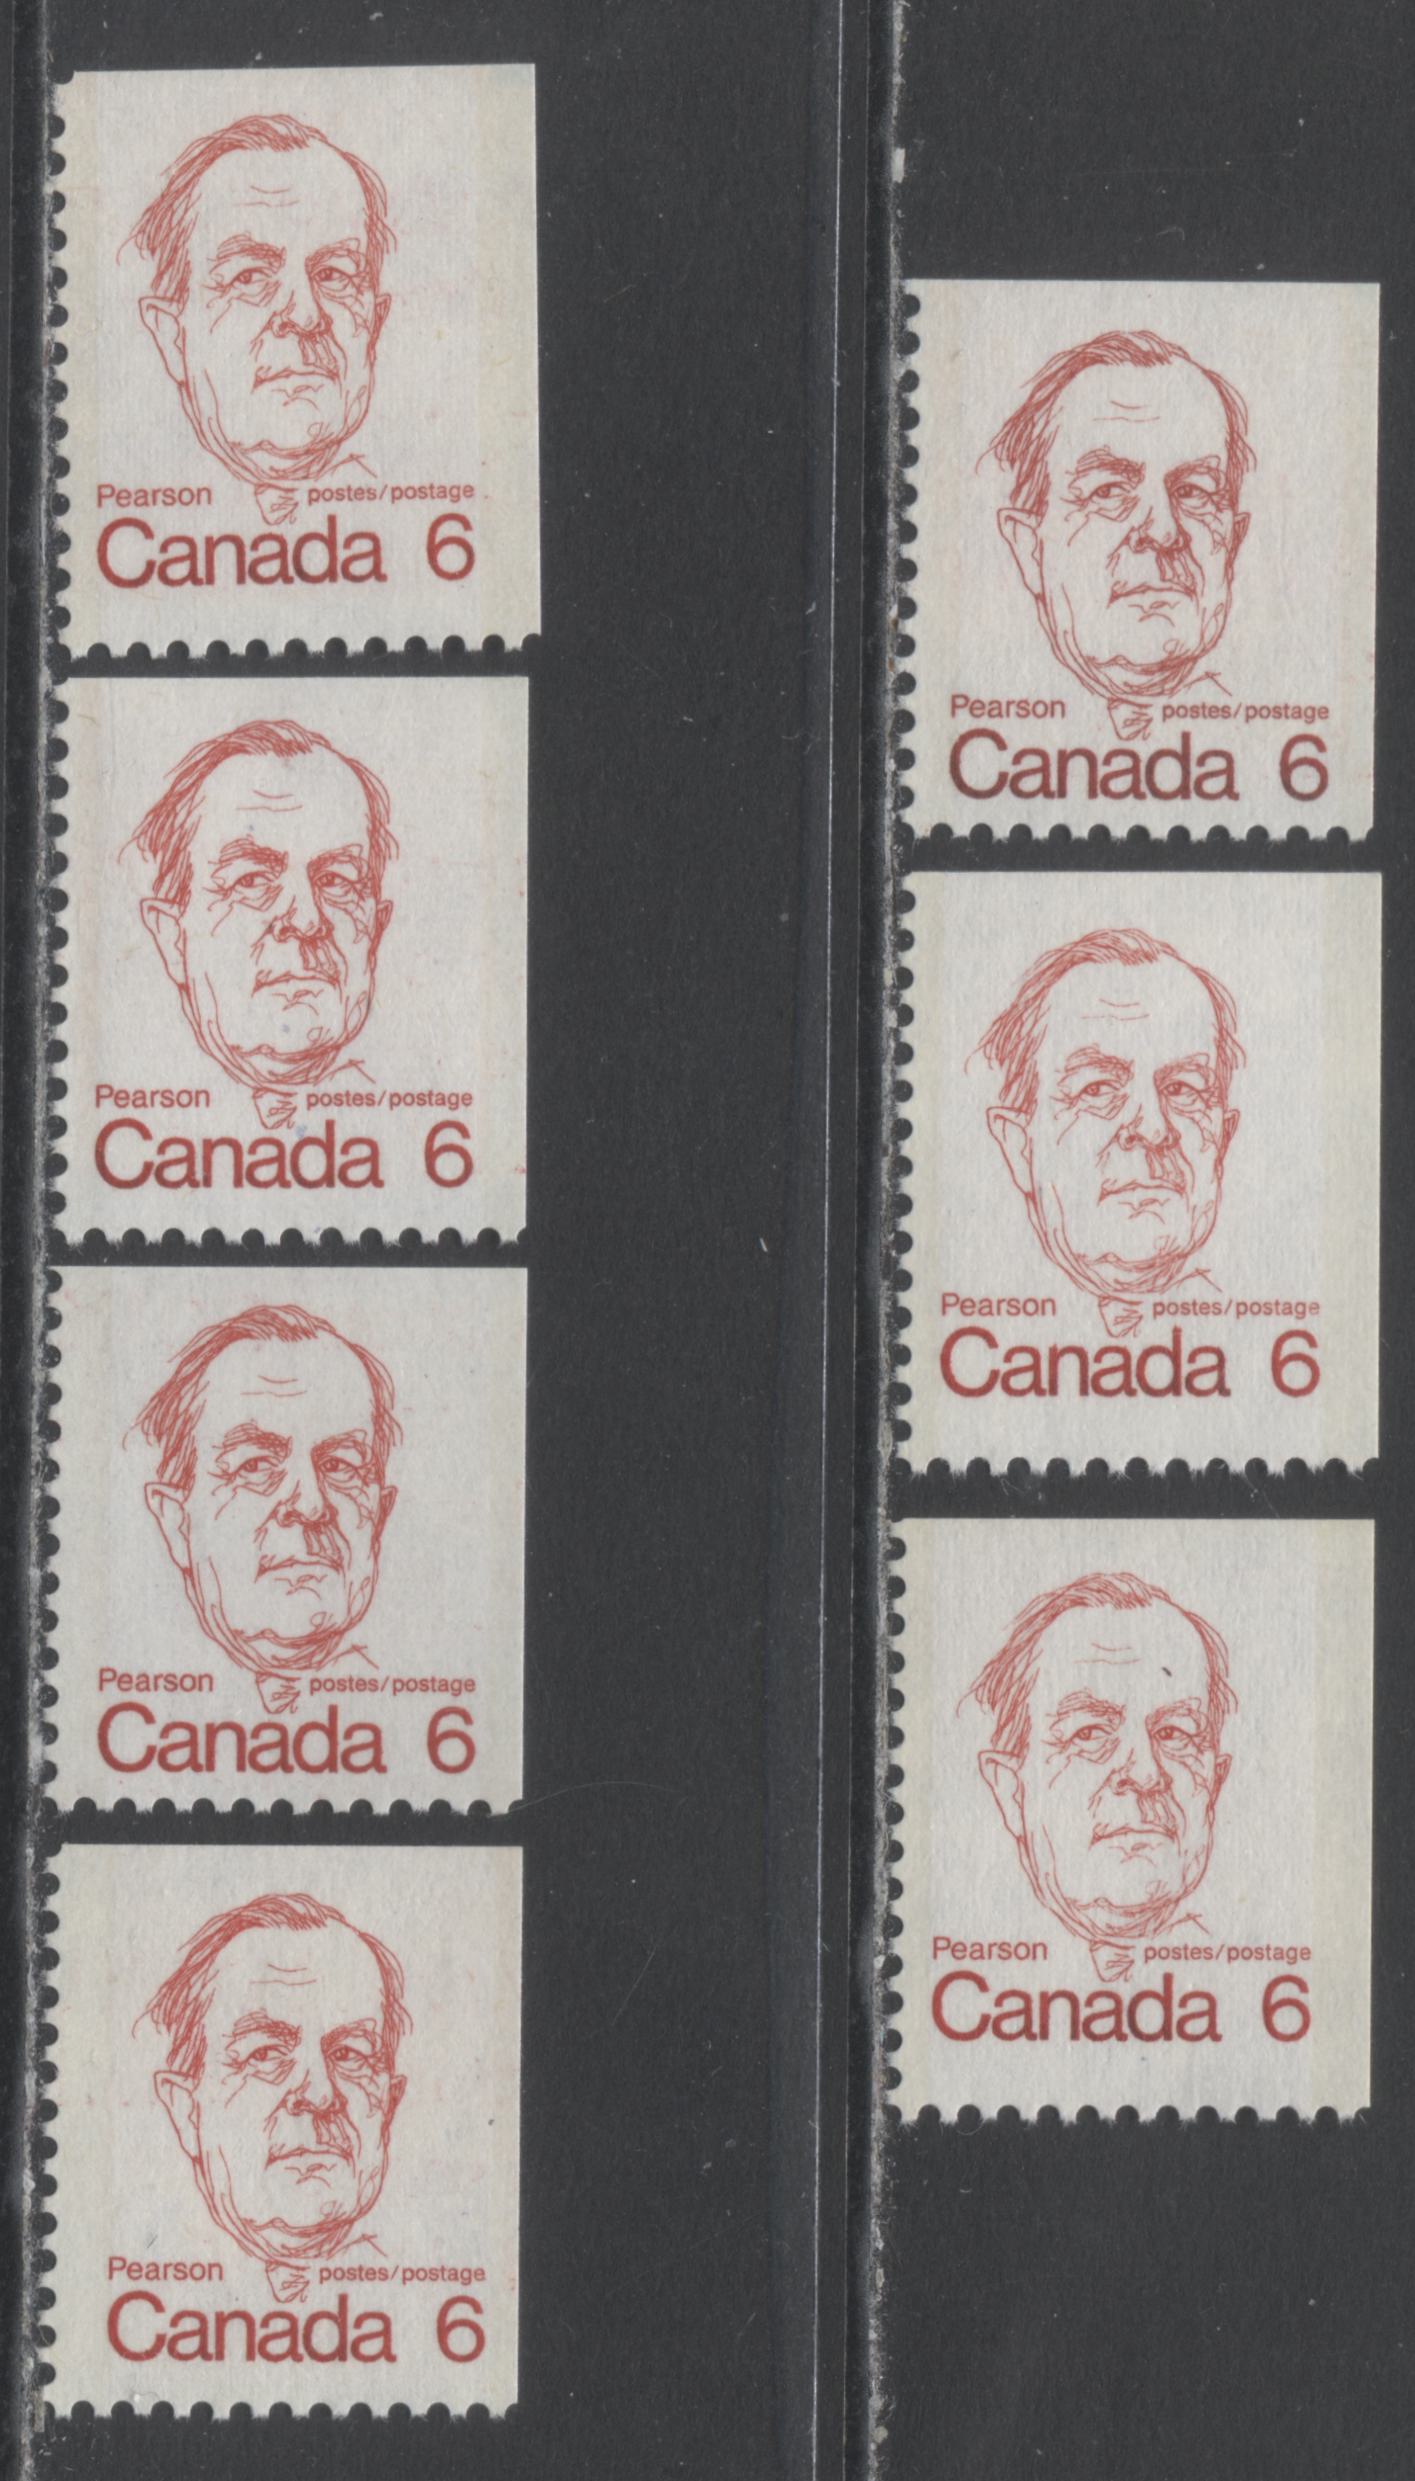 Lot 319 Canada #591vii, ix-xiii 6c Deep Red Lester B Pearson, 1972-1974 Caricature Issue, 7 VFNH Booklet Singles On NF, DF, LF, MF & HF Papers